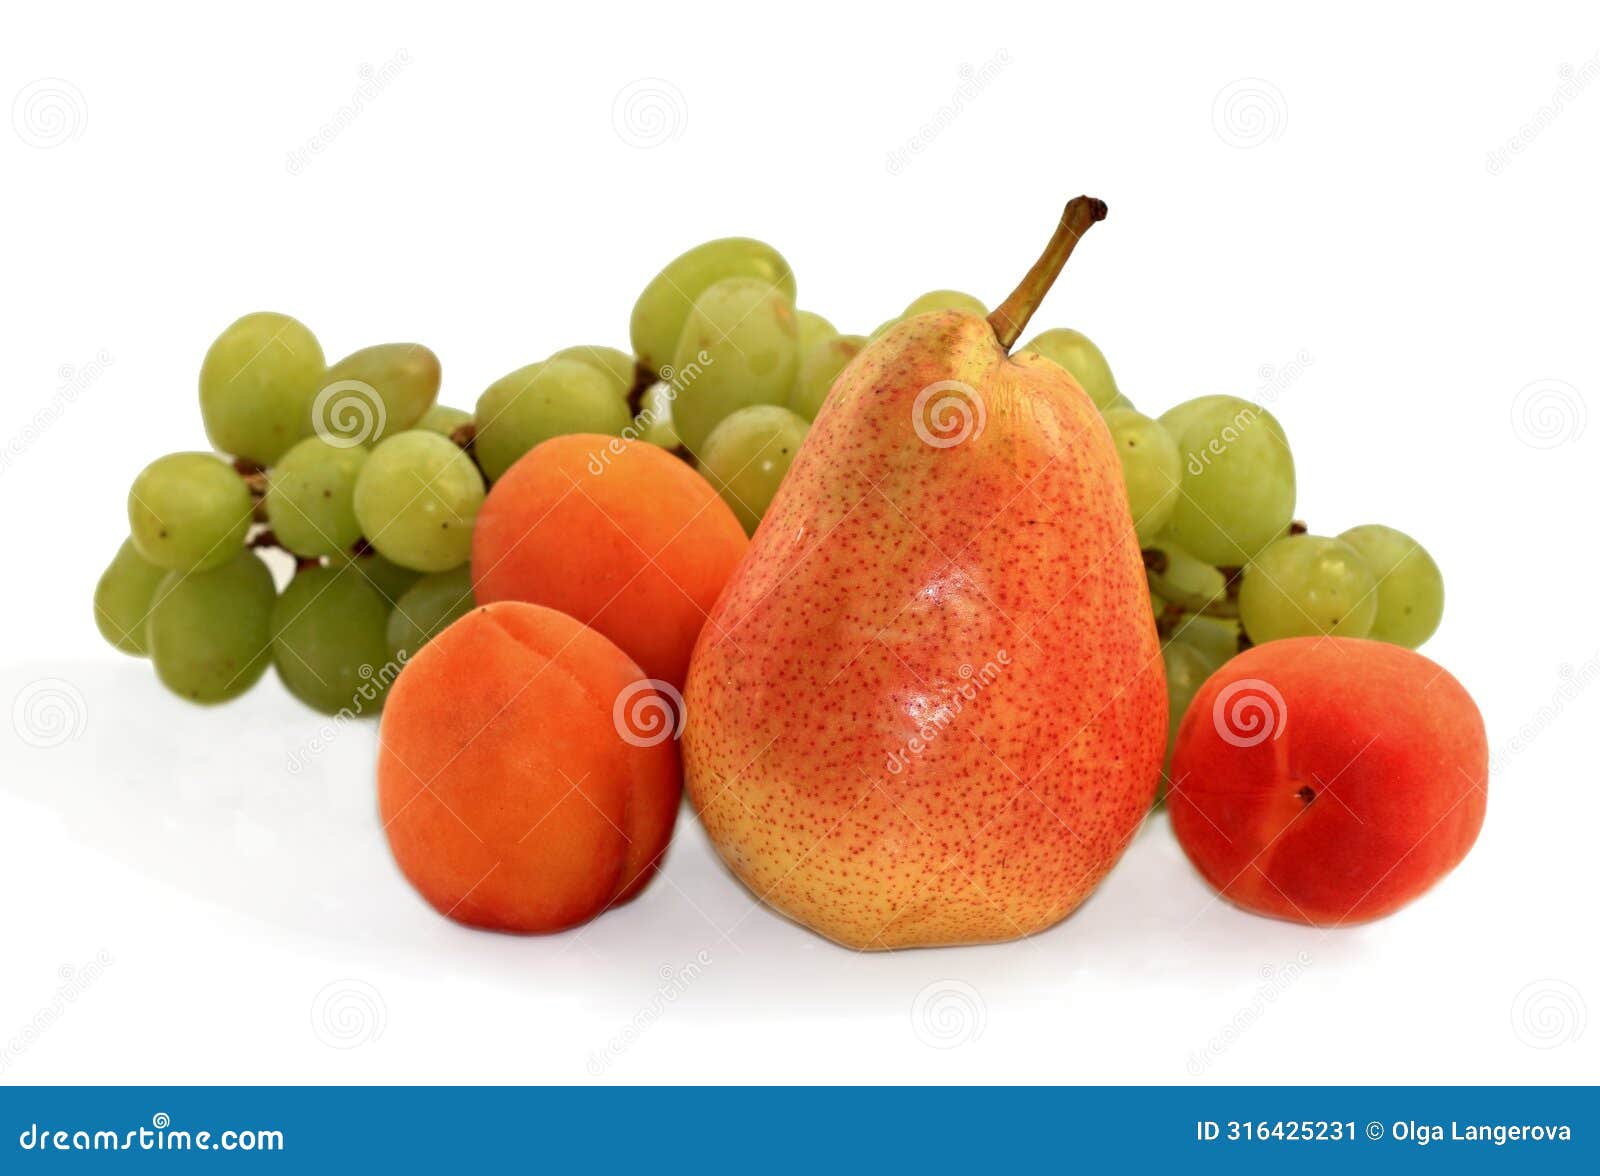 juicy fresh pears apricots and grapes on a white background